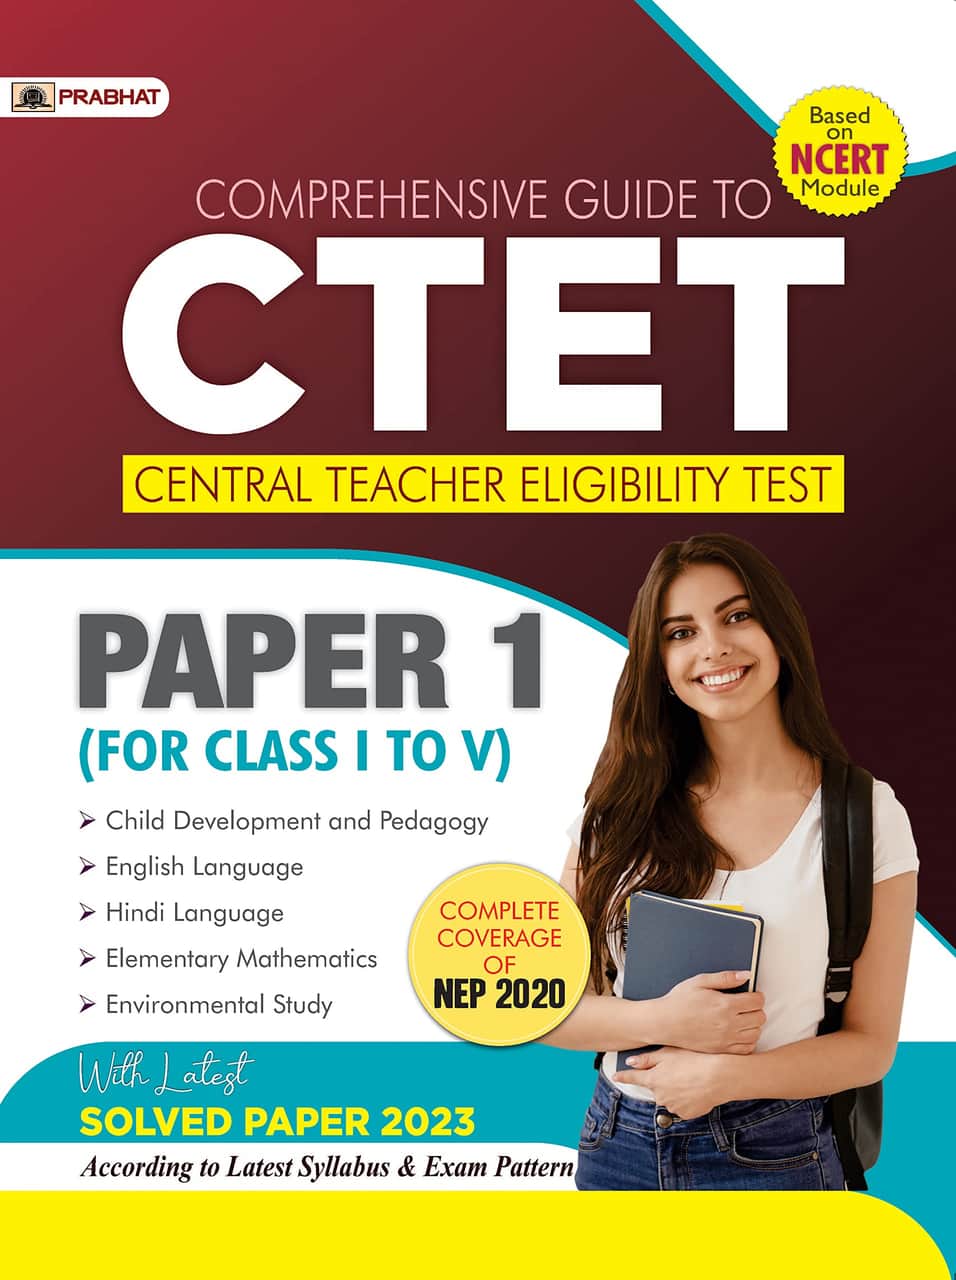 Comprehensive Guide To CTET Central Teacher Eligibility Test Paper-1 (CTET Guide Paper 1 Class: I-V)